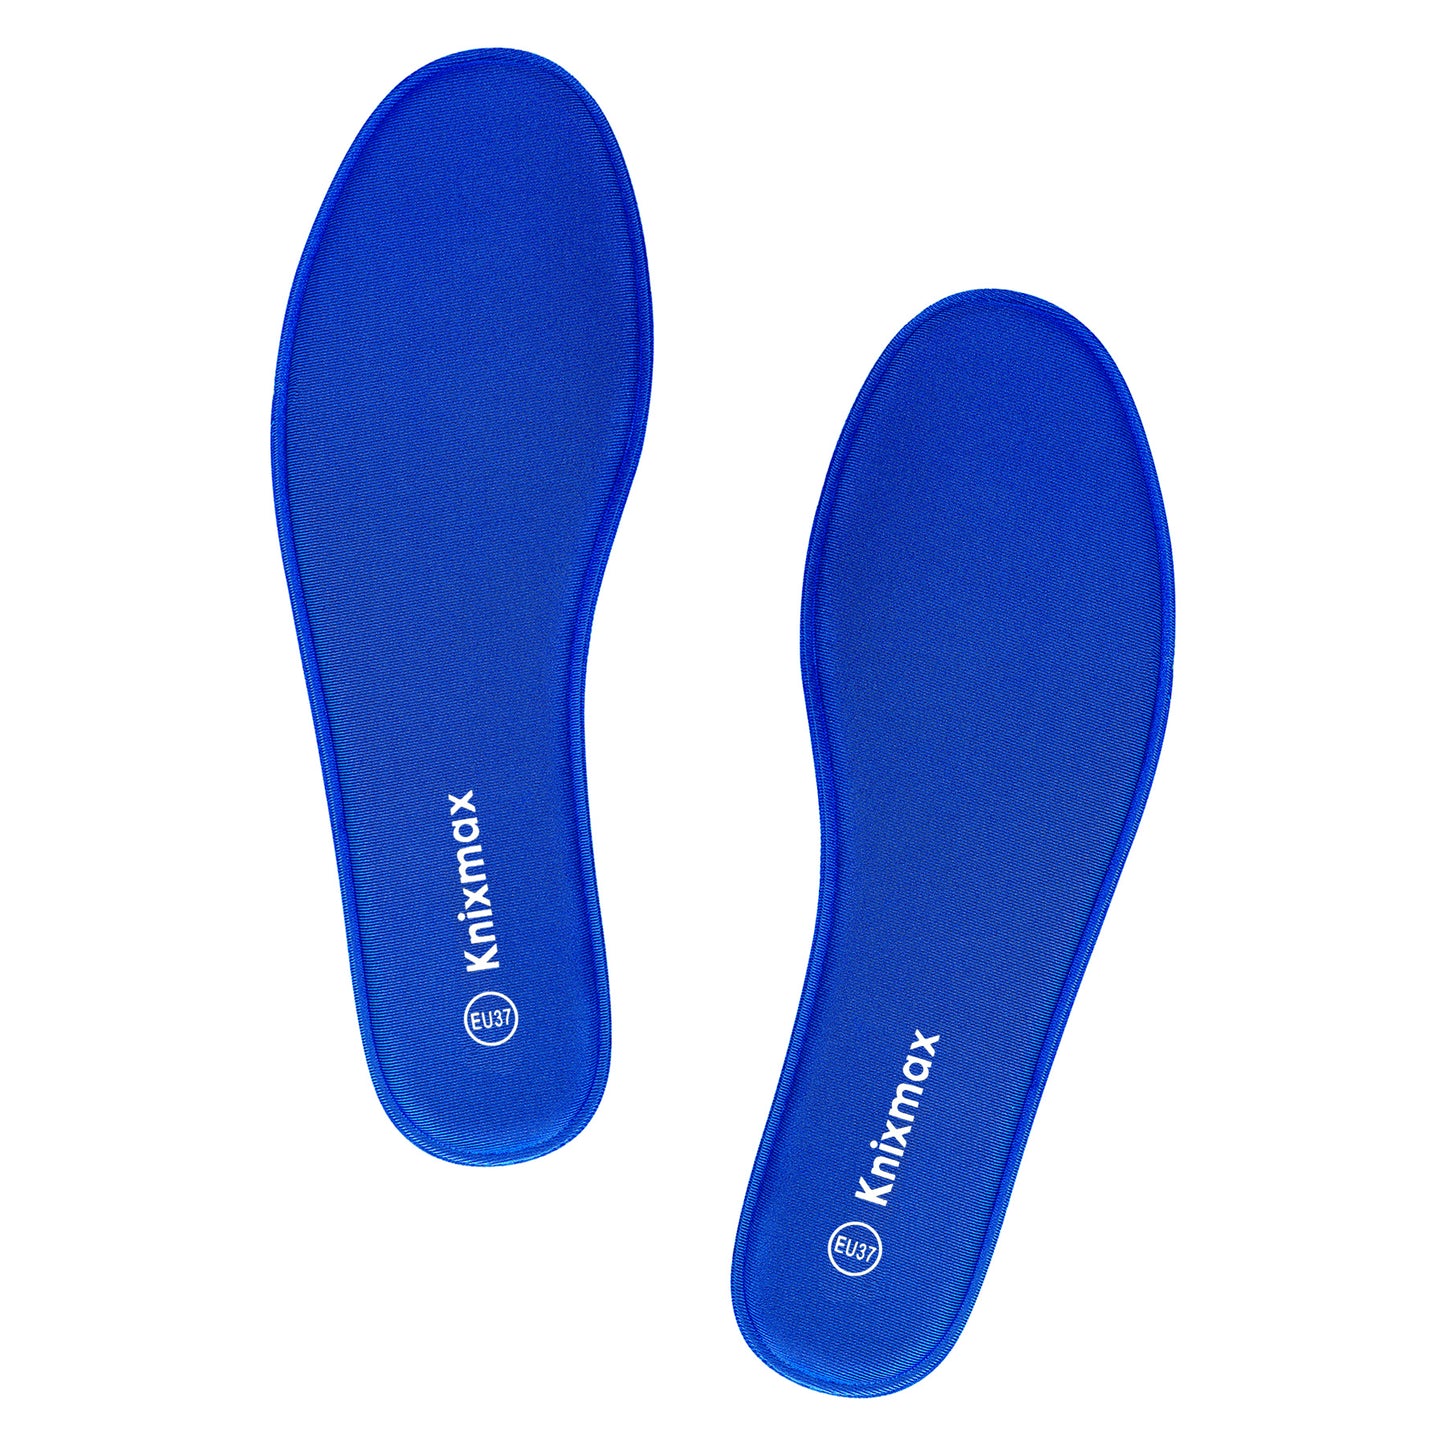 Knixmax Men's Memory Foam Insoles, Navy, for Athletic Shoes & Sneakers